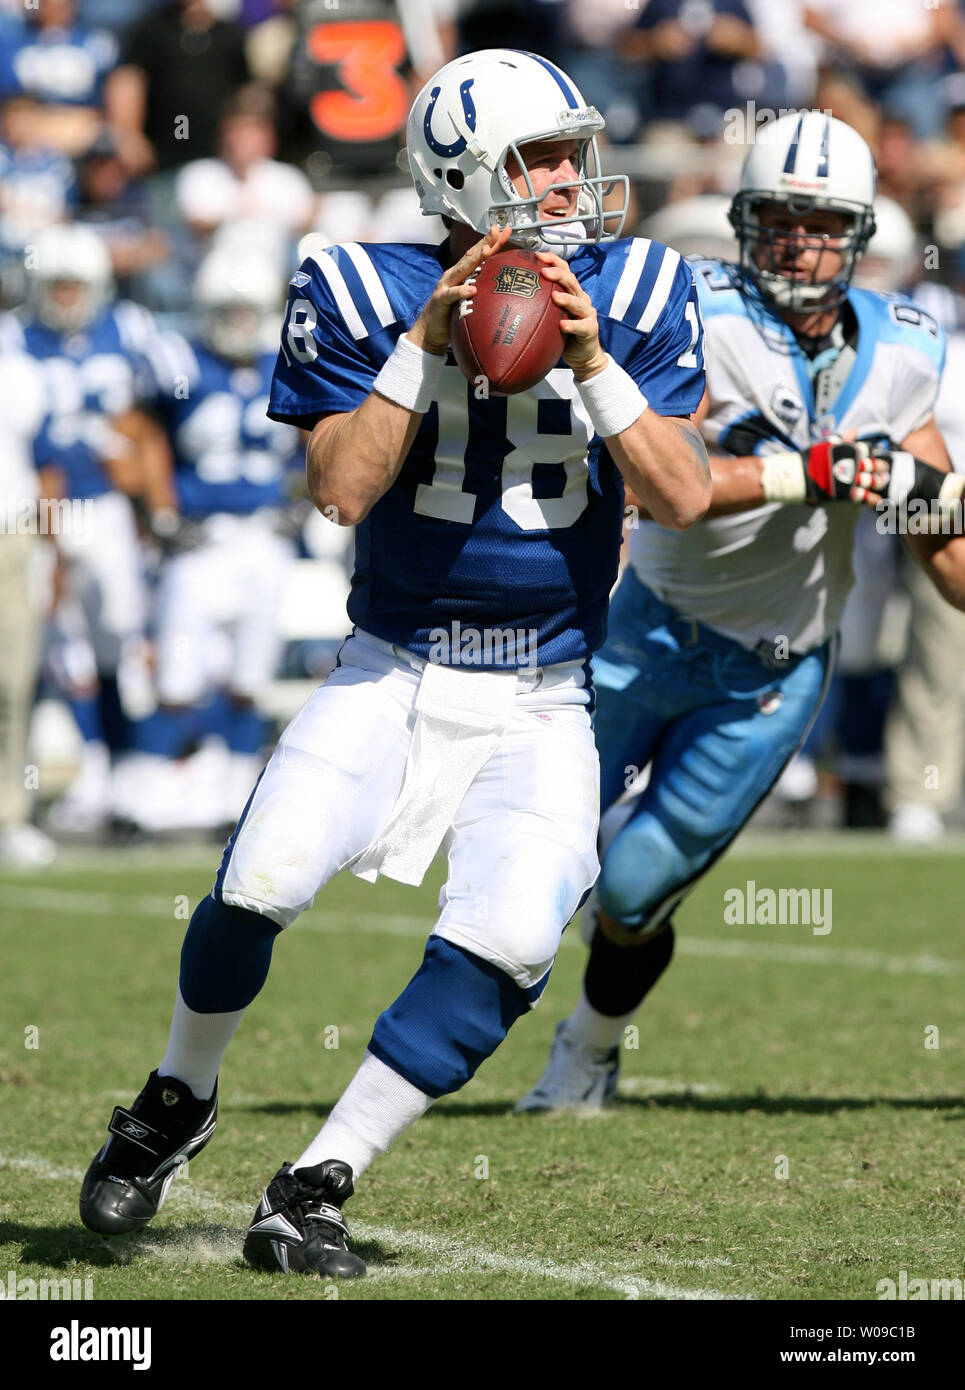 Indianapolis Colts quarterback Peyton Manning drops back in the